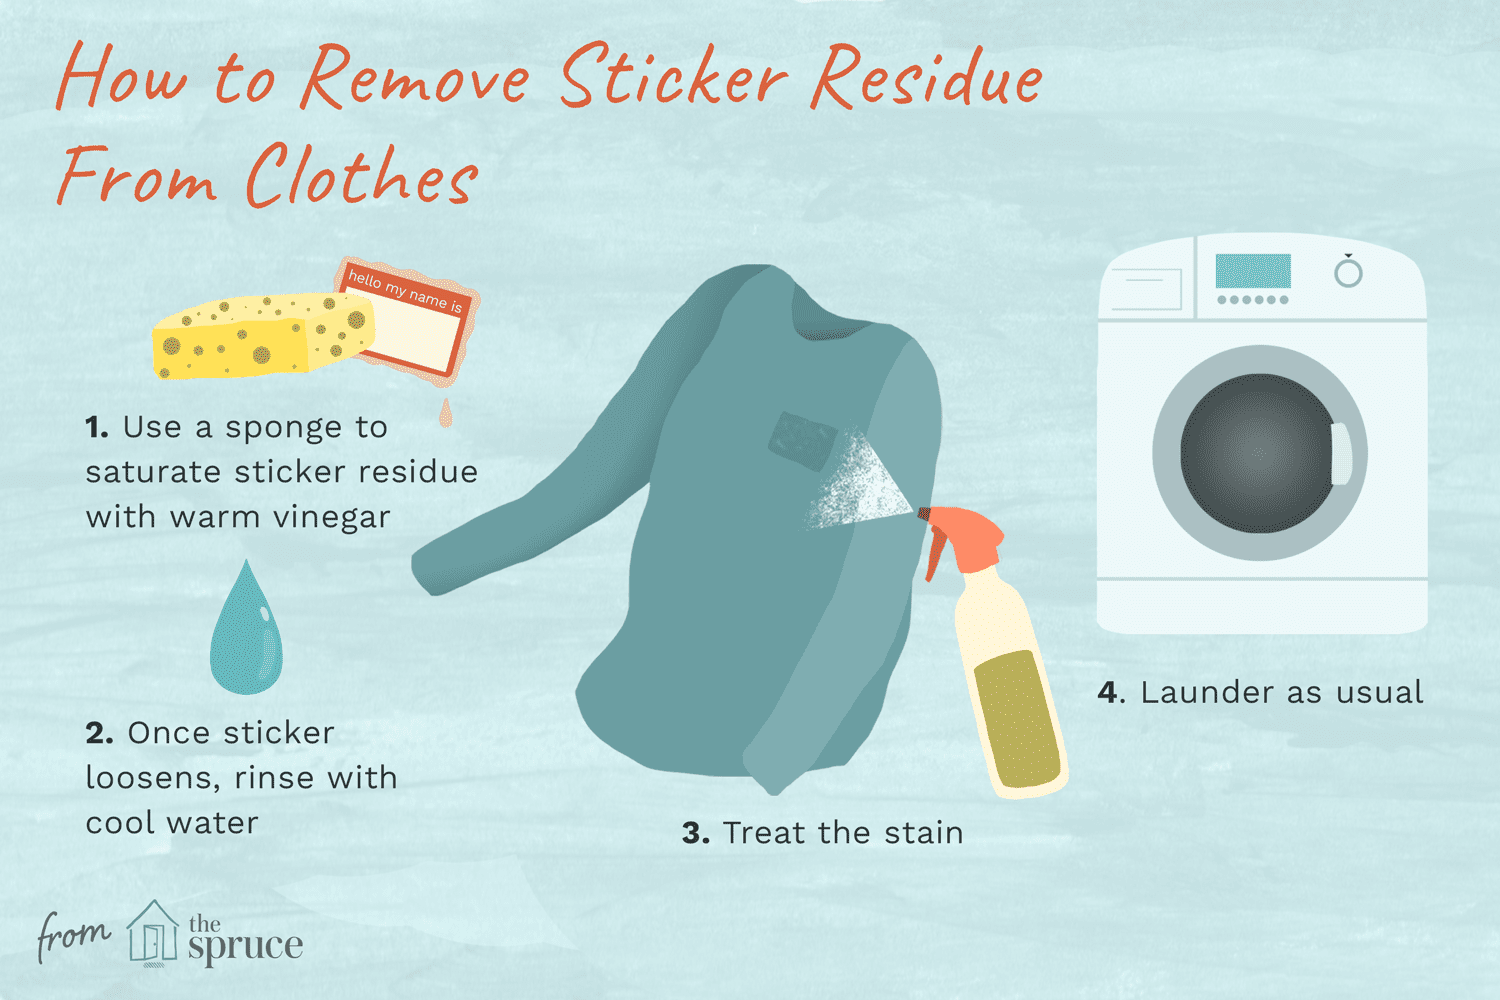 How To Remove Sticker Residue From Clothes And Upholstery,Moscow Mule Ingredients Whiskey